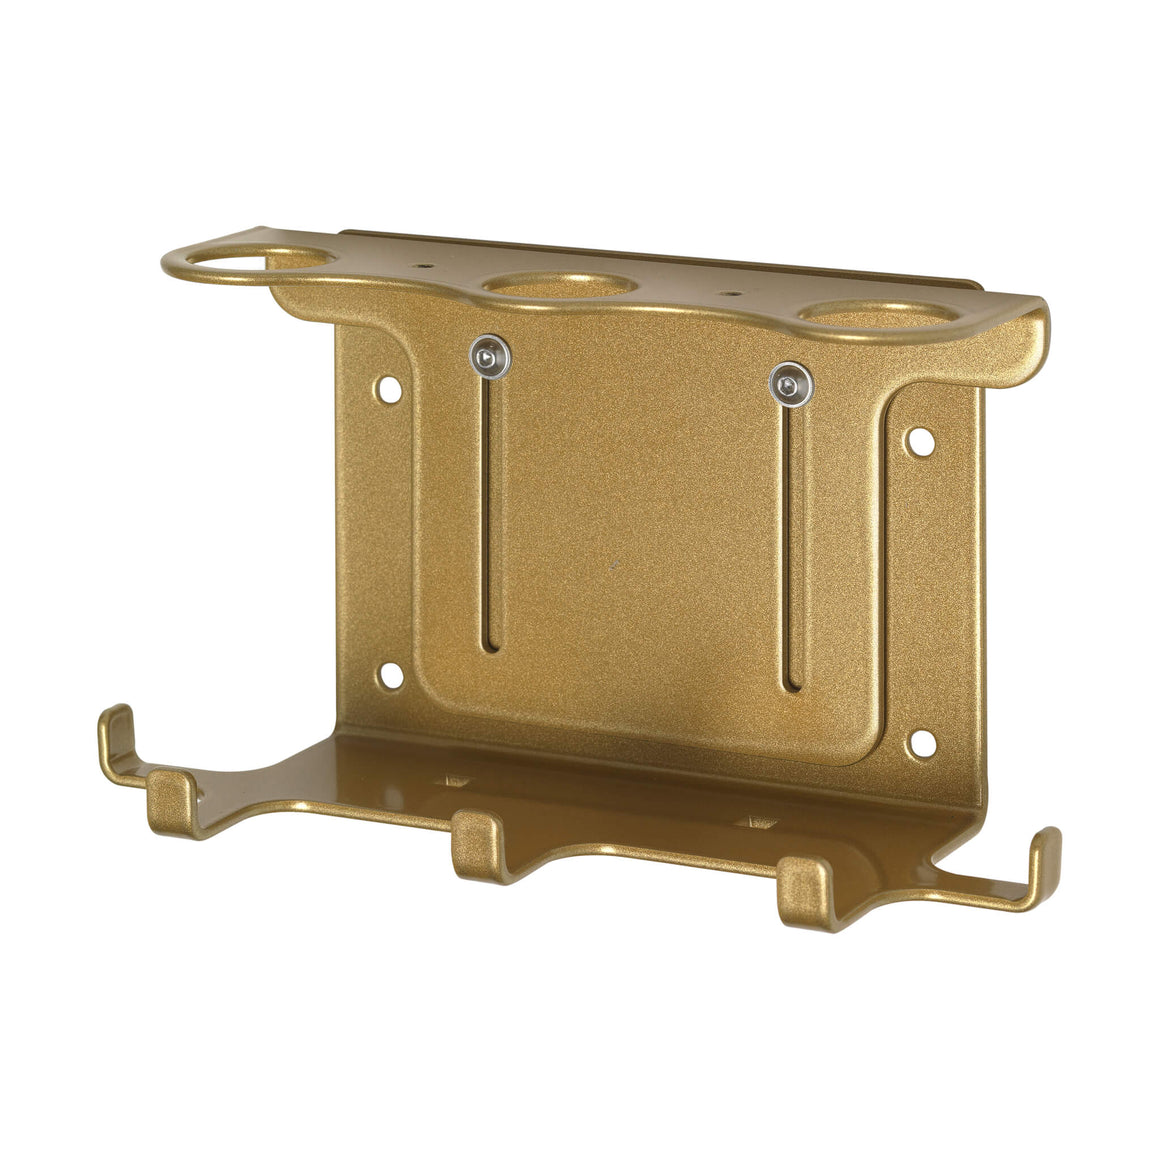 Triple 300ml Security Wall-Mounted Holder - Gold